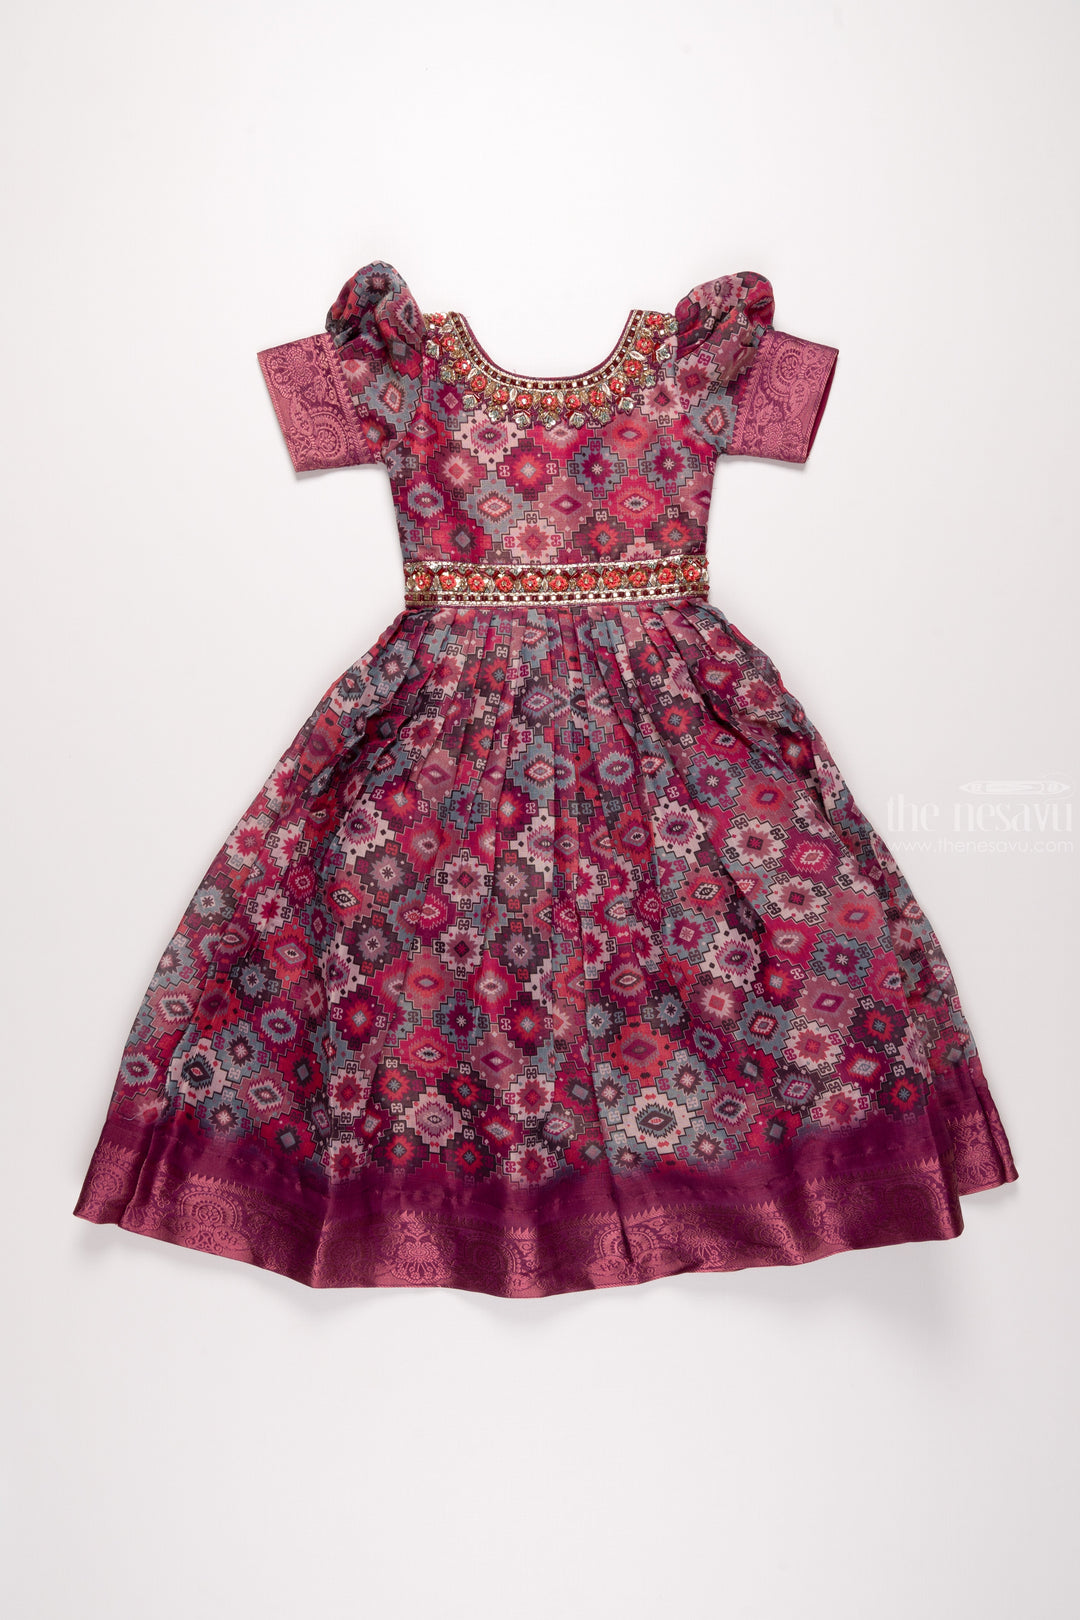 The Nesavu Girls Party Gown Twilight Traditions: Regal Ethnic Gown for Young Girls Nesavu 18 (2Y) / Maroon / Organza Printed GA183A-18 Deep Maroon Ethnic Gown with Gold Accents | Timeless Elegance for Young Girls | The Nesavu